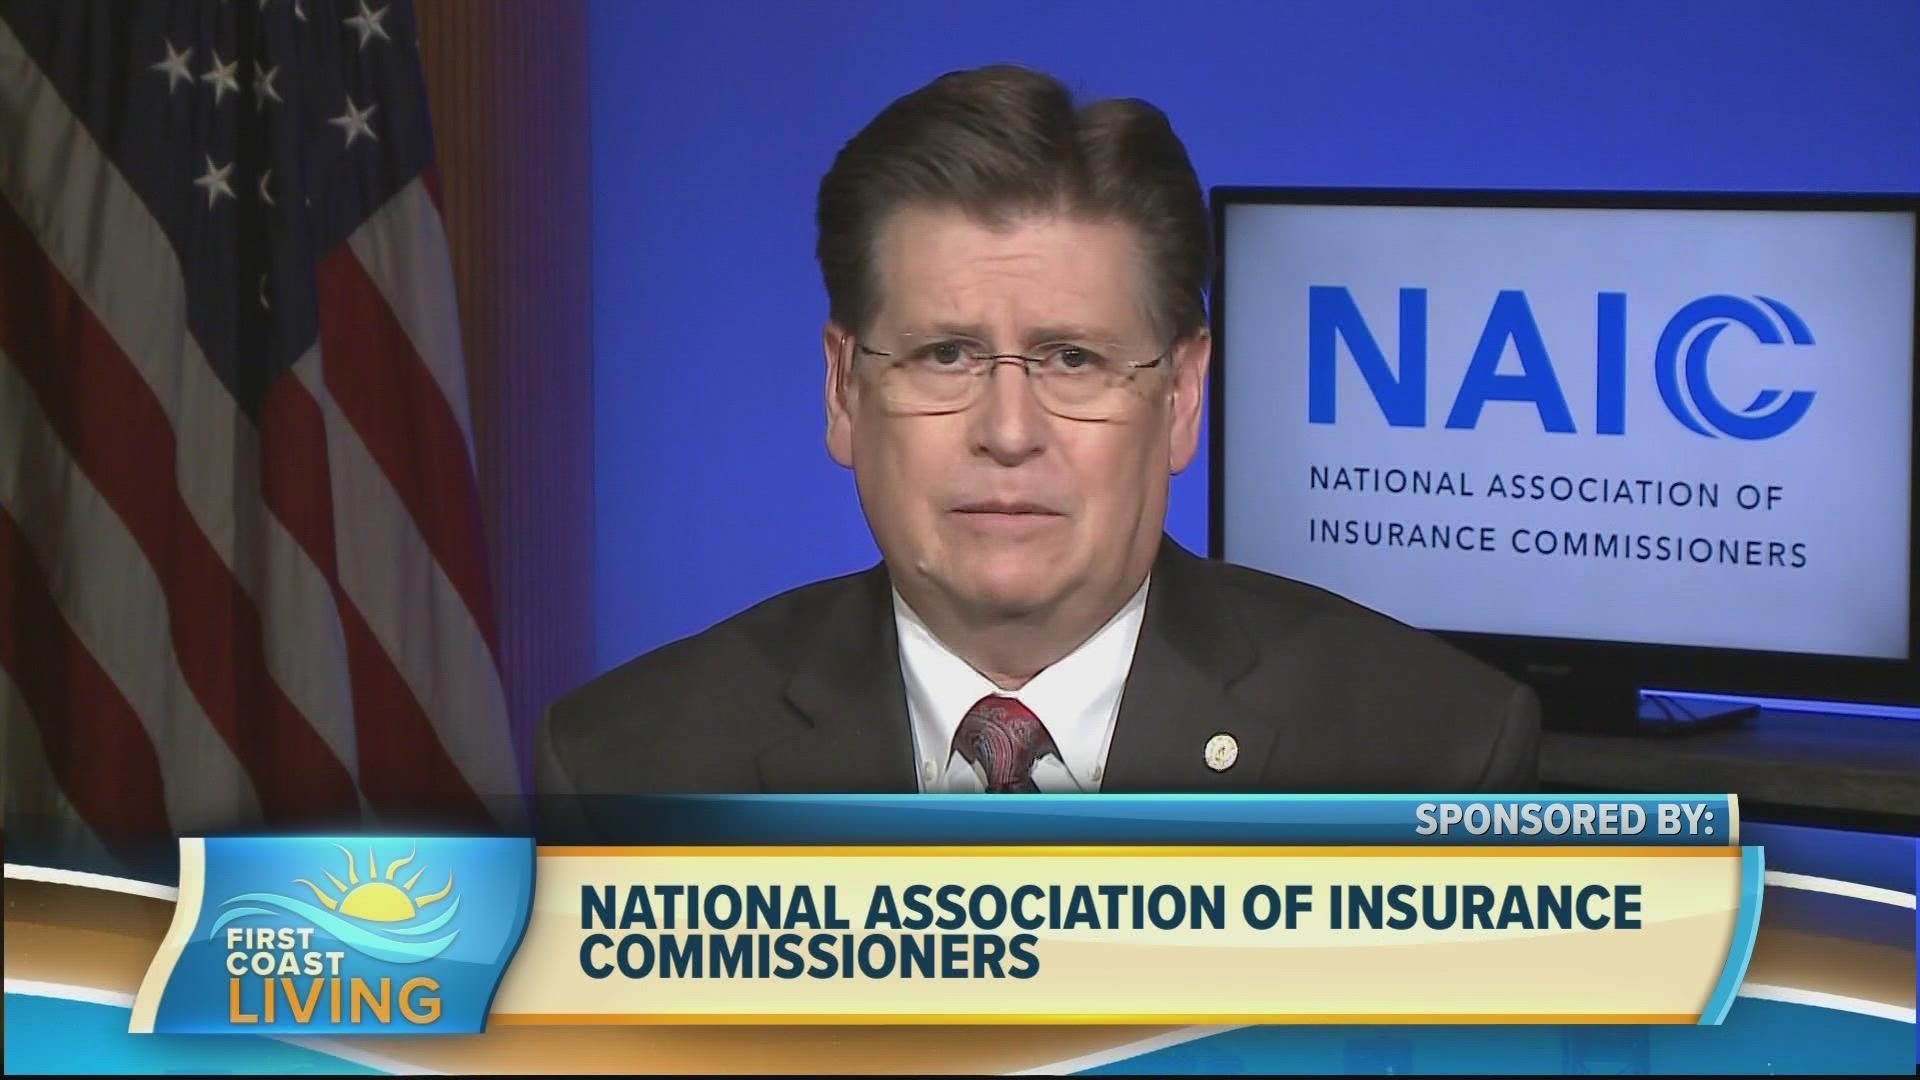 The National Association of Insurance Commissioners' (NAIC) President, & Idaho Insurance Commissioner, Dean Cameron shares suggestions on purchasing life insurance.